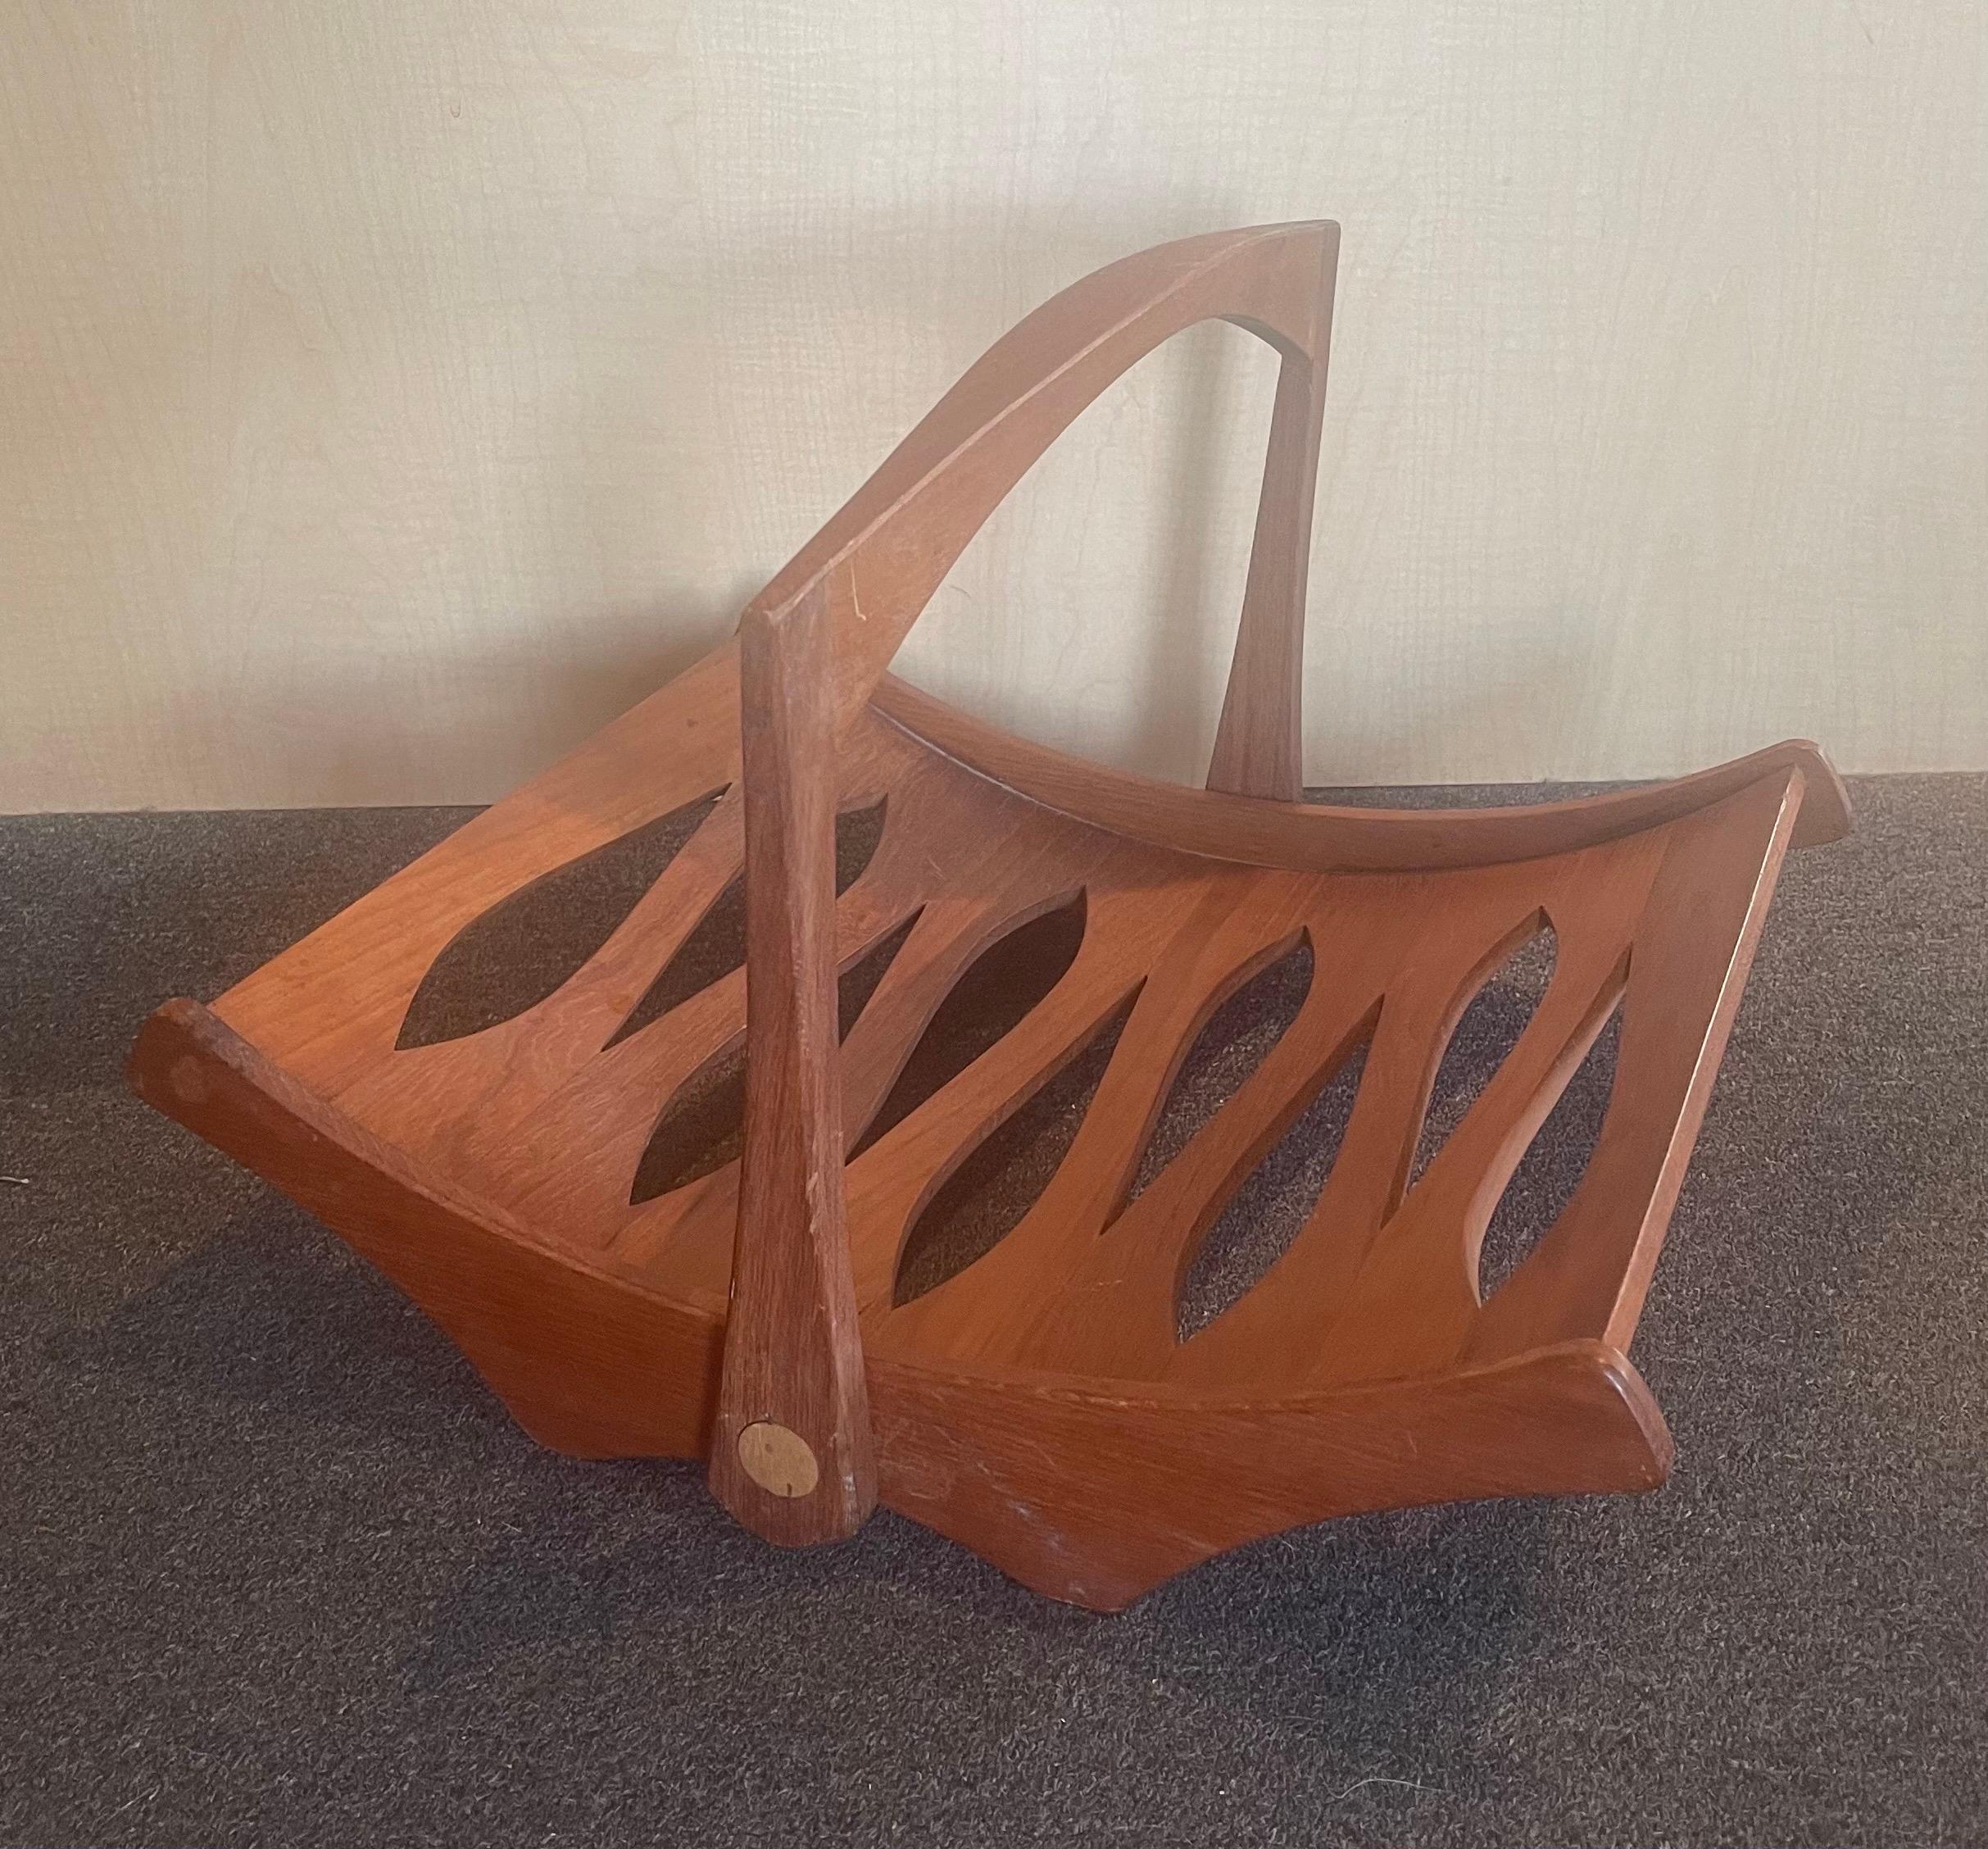 A very nice and hard to find Danish modern staved teak magazine holder by Jens Quistgaard for Dansk, circa 1960s. The piece is 18